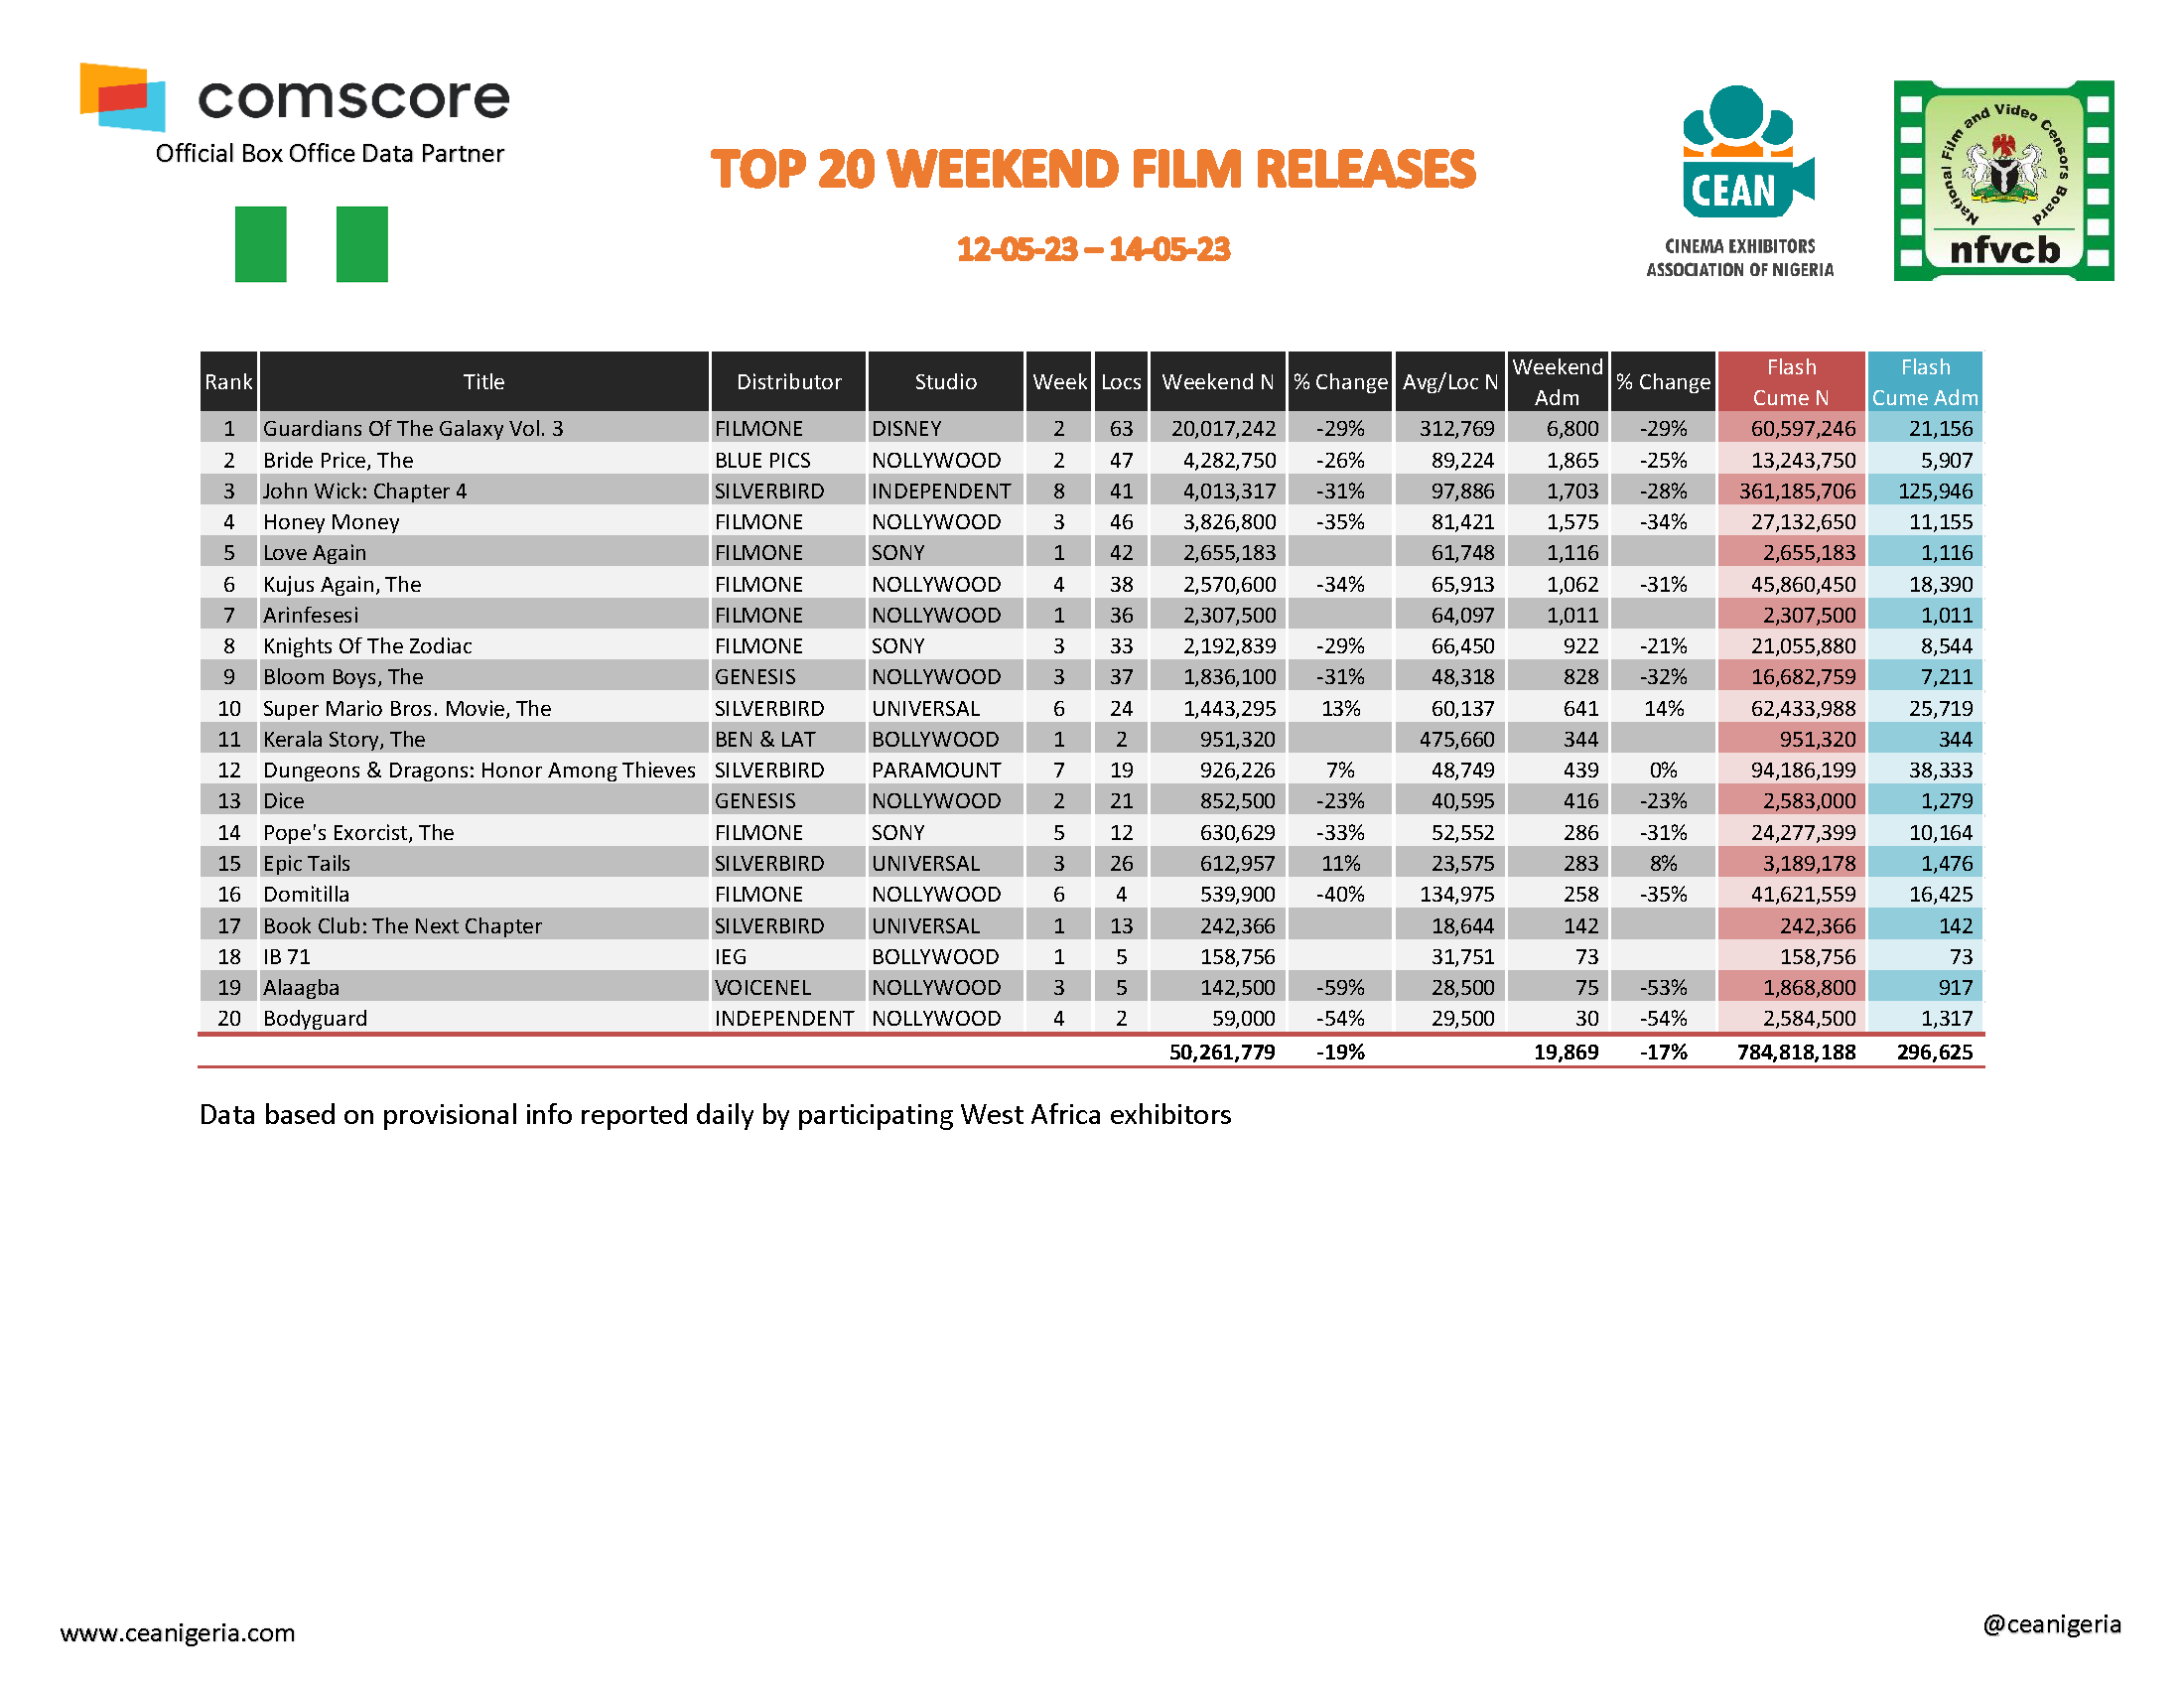 Top 20 films Weekend 12th 14th May